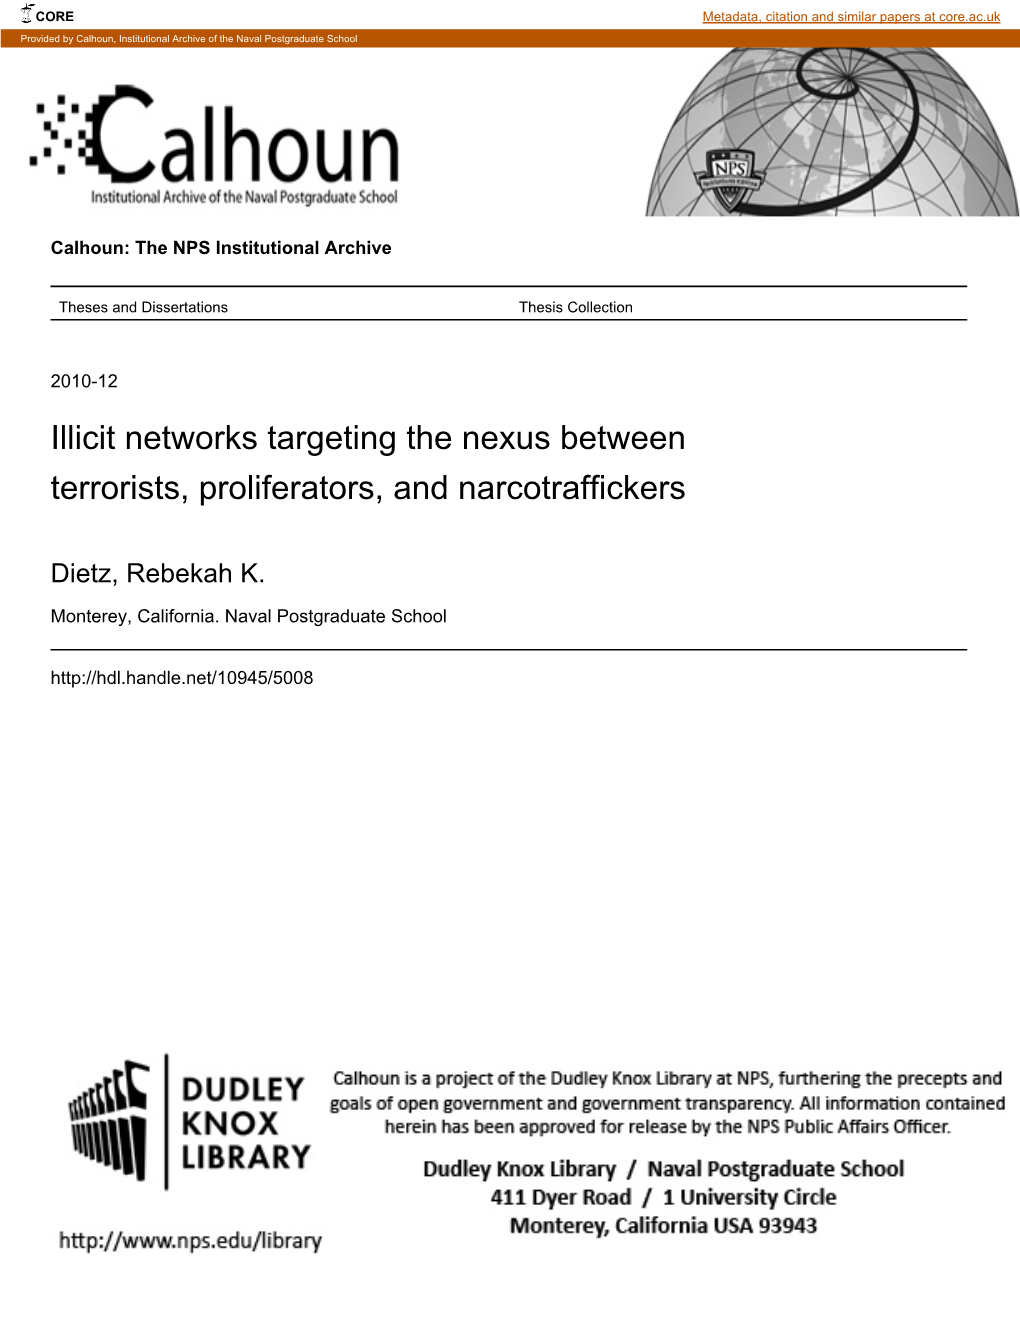 Illicit Networks Targeting the Nexus Between Terrorists, Proliferators, and Narcotraffickers